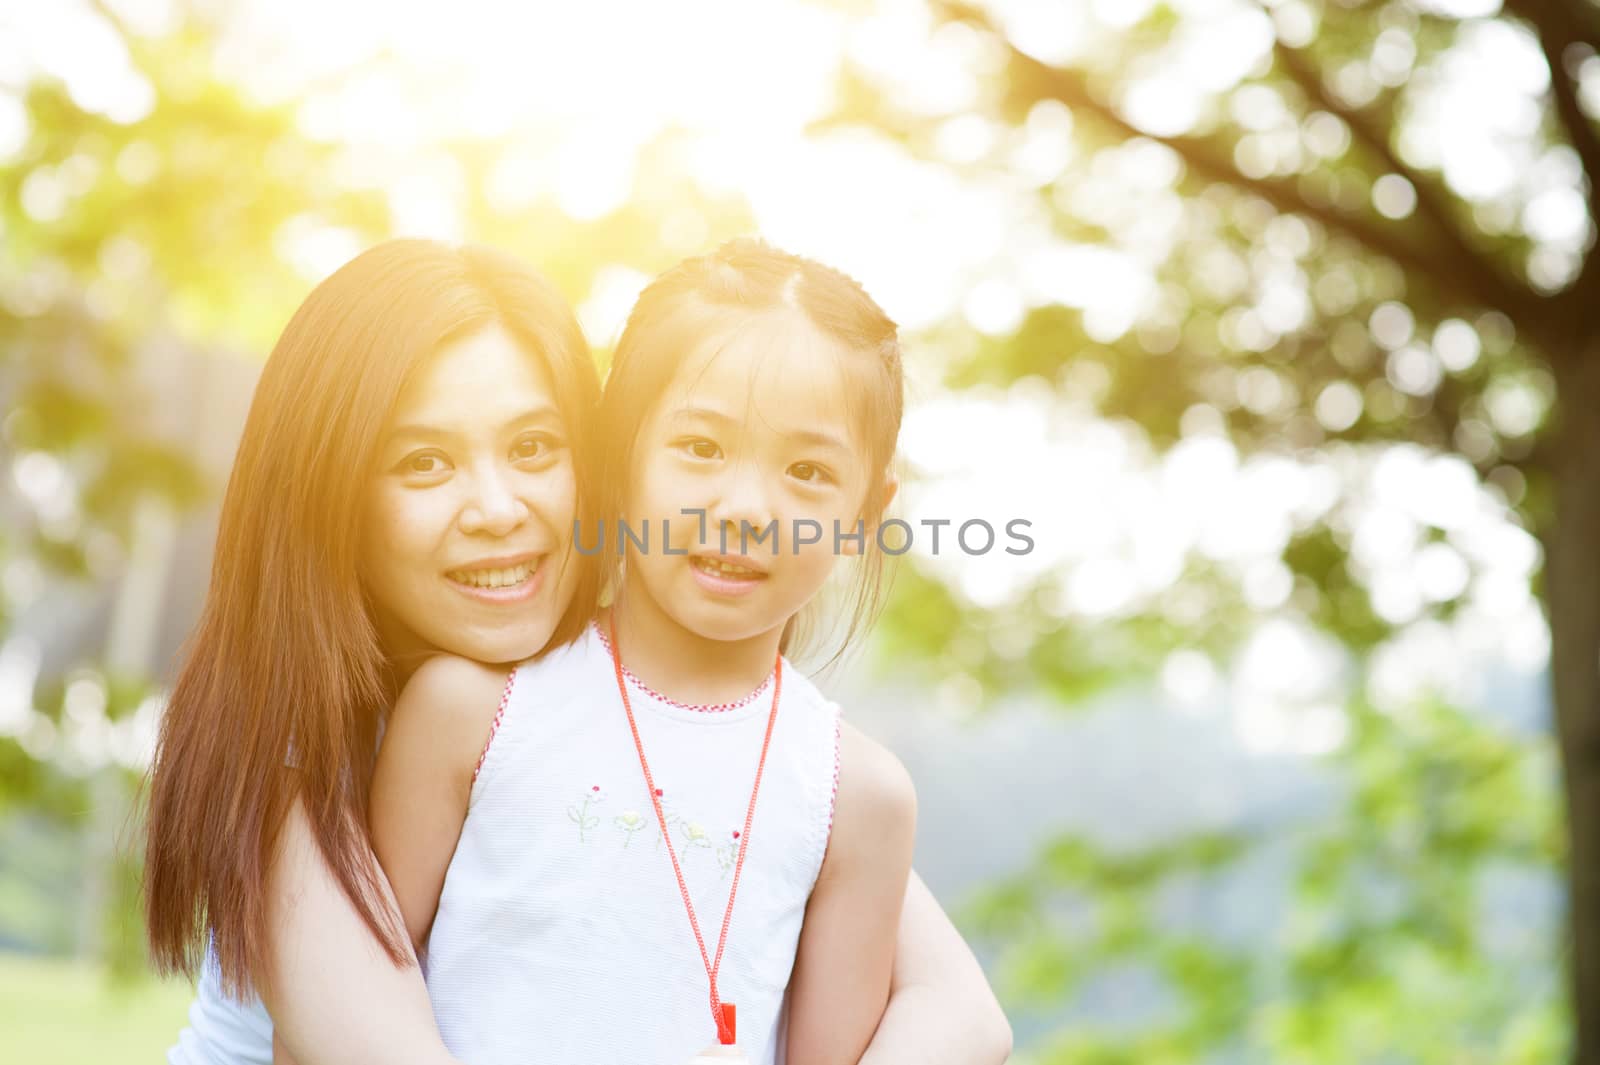 Mother and child are hugging and having fun outdoor in nature - photo with sun flare.